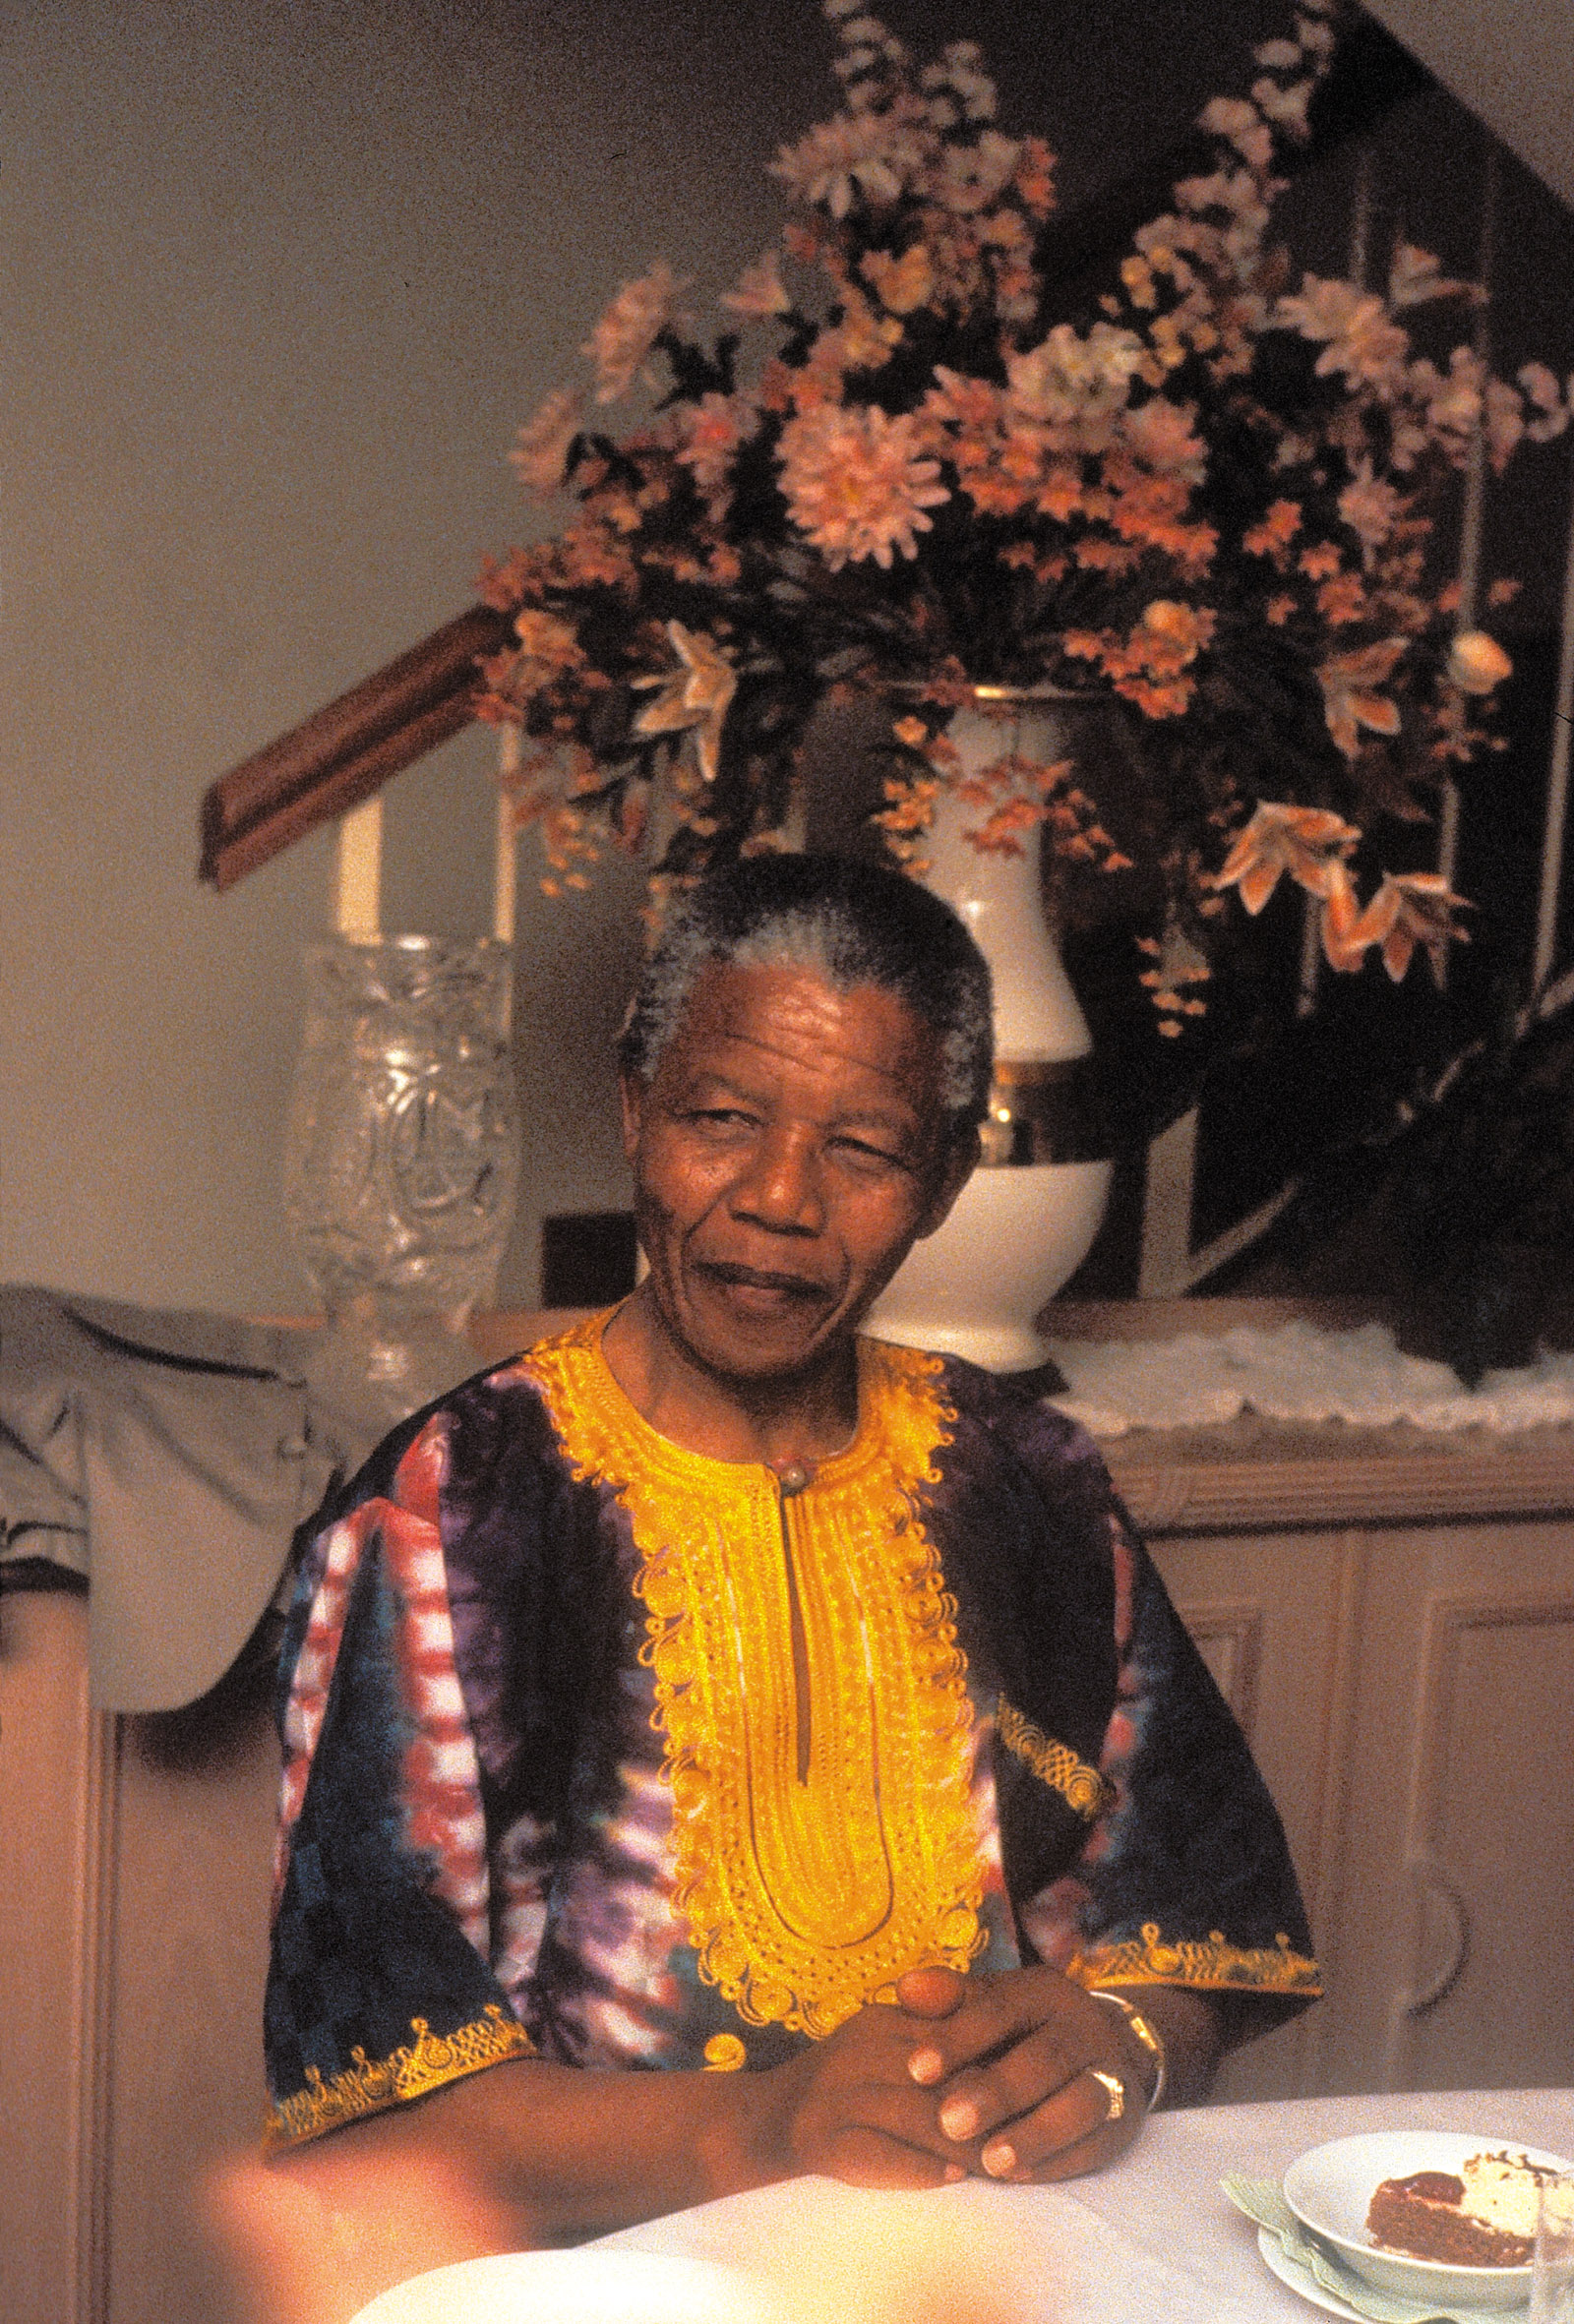 Nelson Mandela after his release from prison, Soweto, 1990; photograph by Inge Morath. It appears in Linda Gordon’s Inge Morath: An Illustrated Biography, just published by the Magnum Foundation and Prestel.